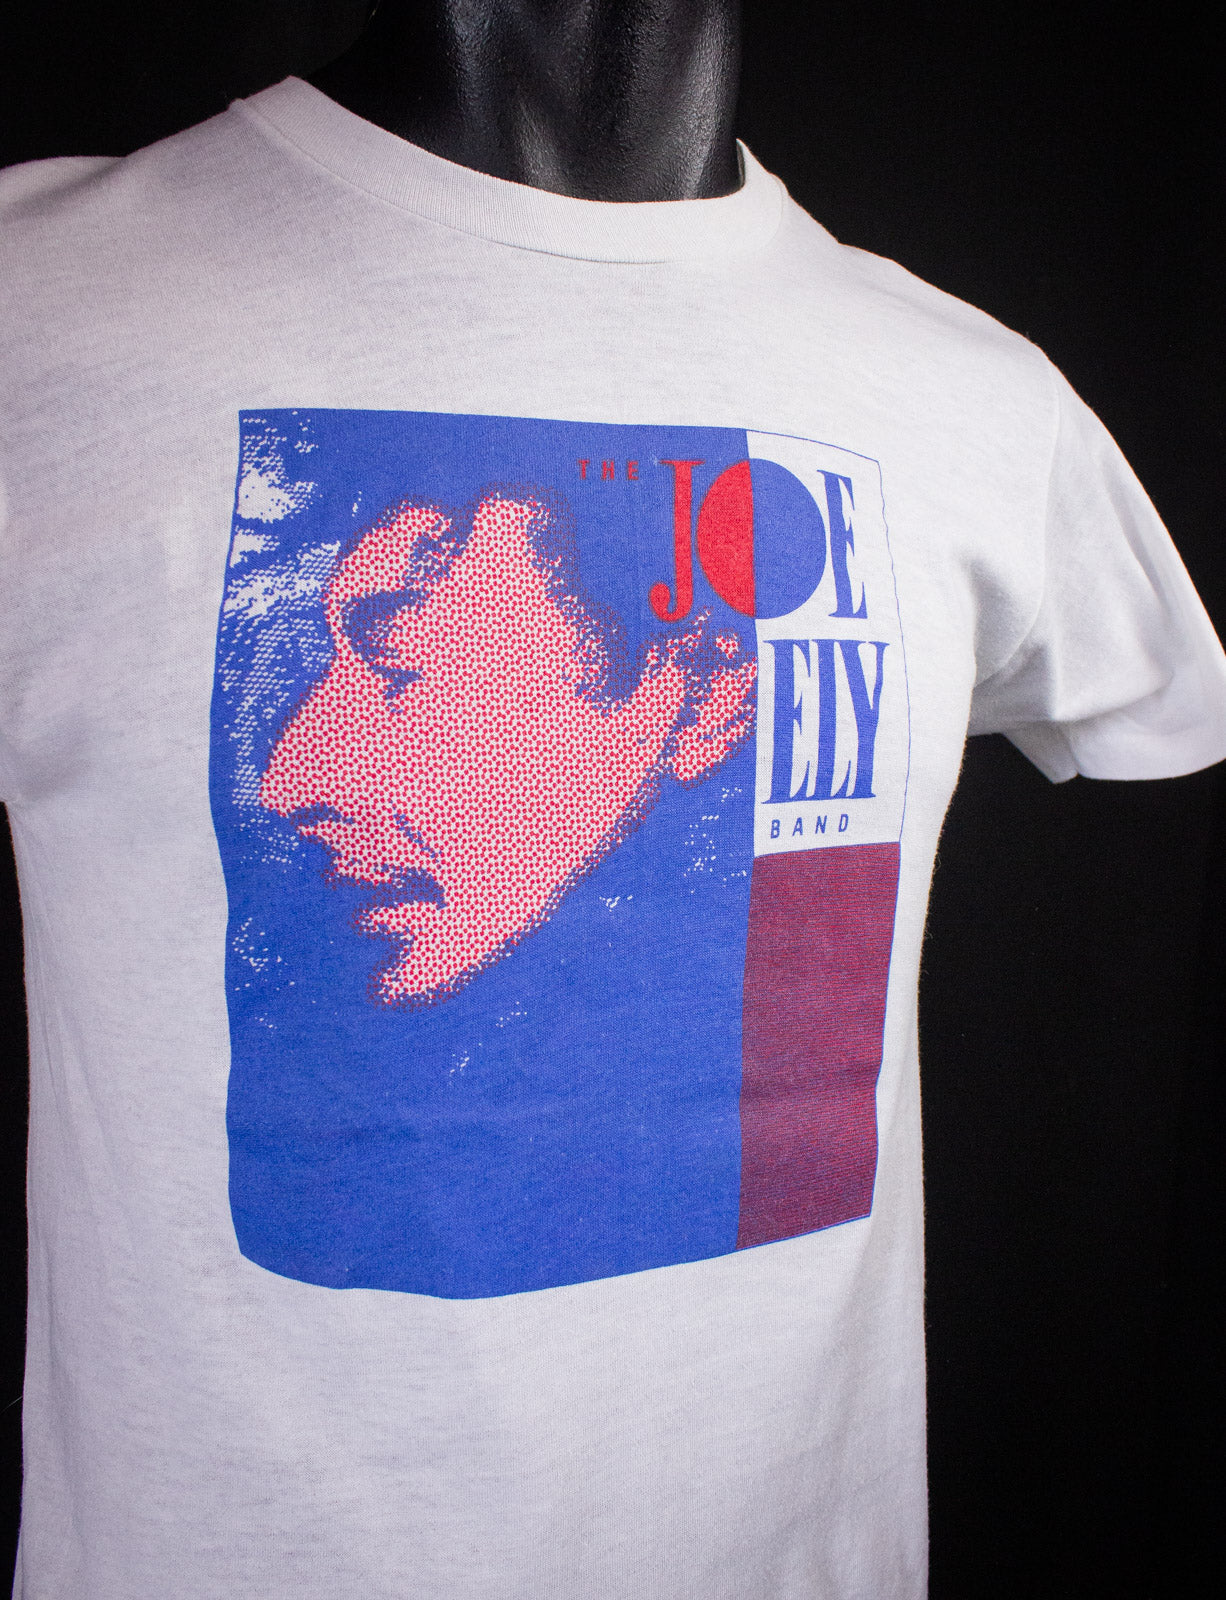 Vintage Joe Ely Band Concert T Shirt 80s White Small